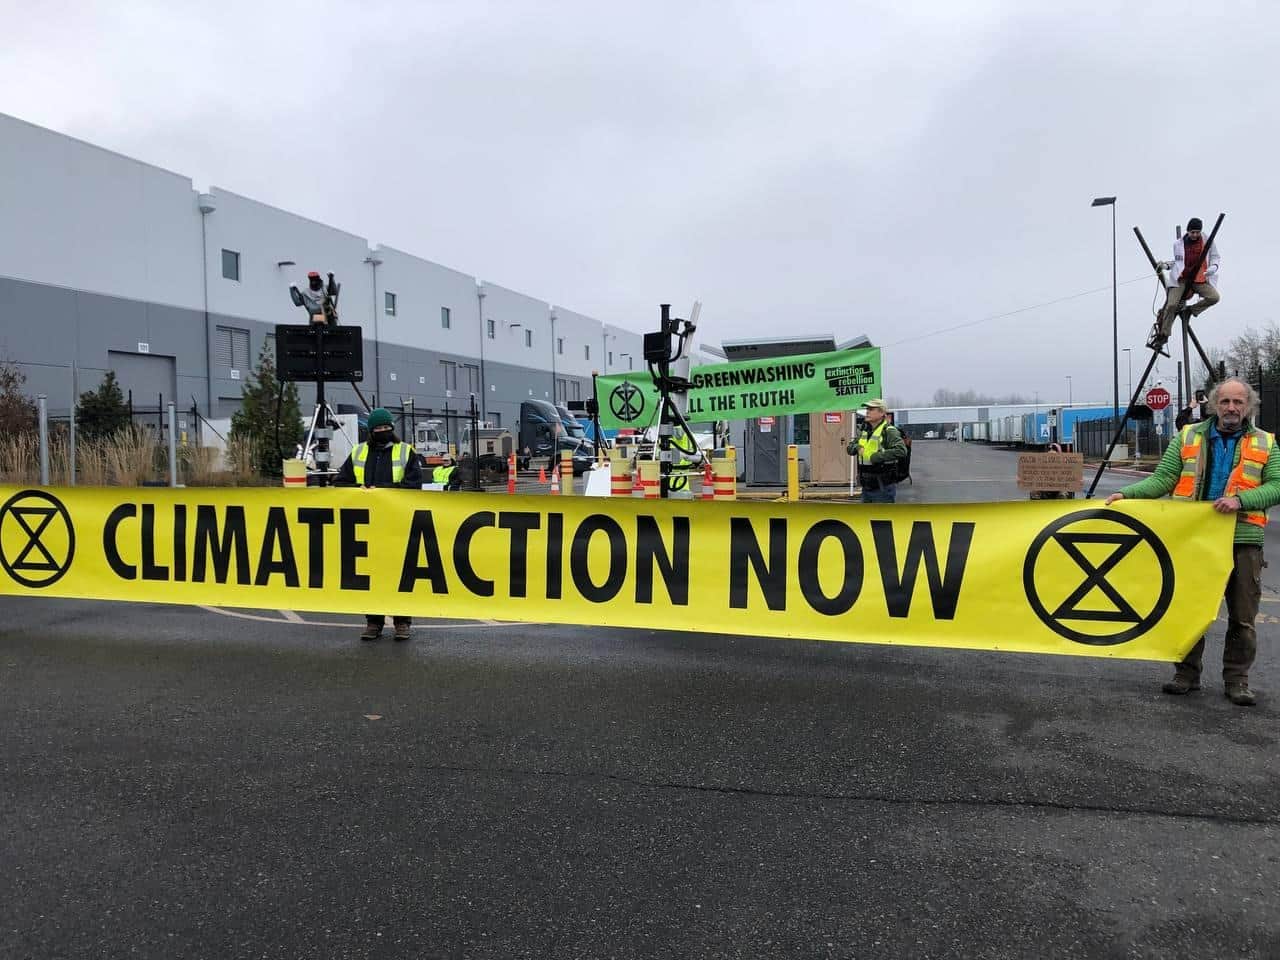 Rebels blocked an Amazon warehouse using banners and tripods